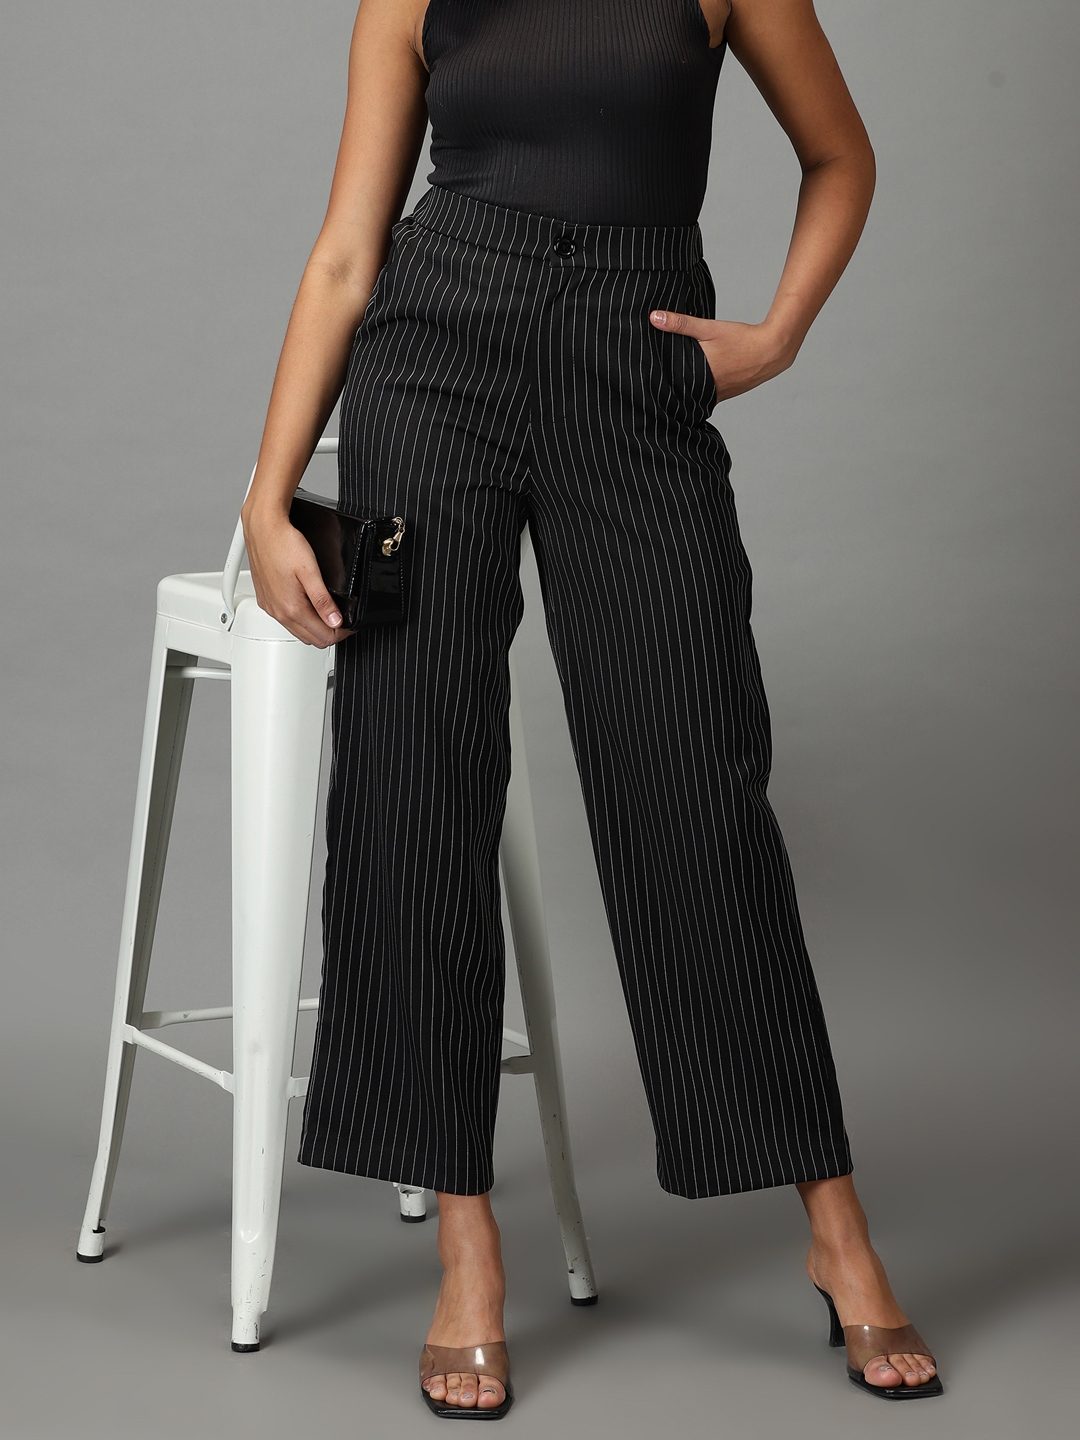 SHOWOFF Women's Mid-Rise Black Striped Straight Fit Formal Trousers